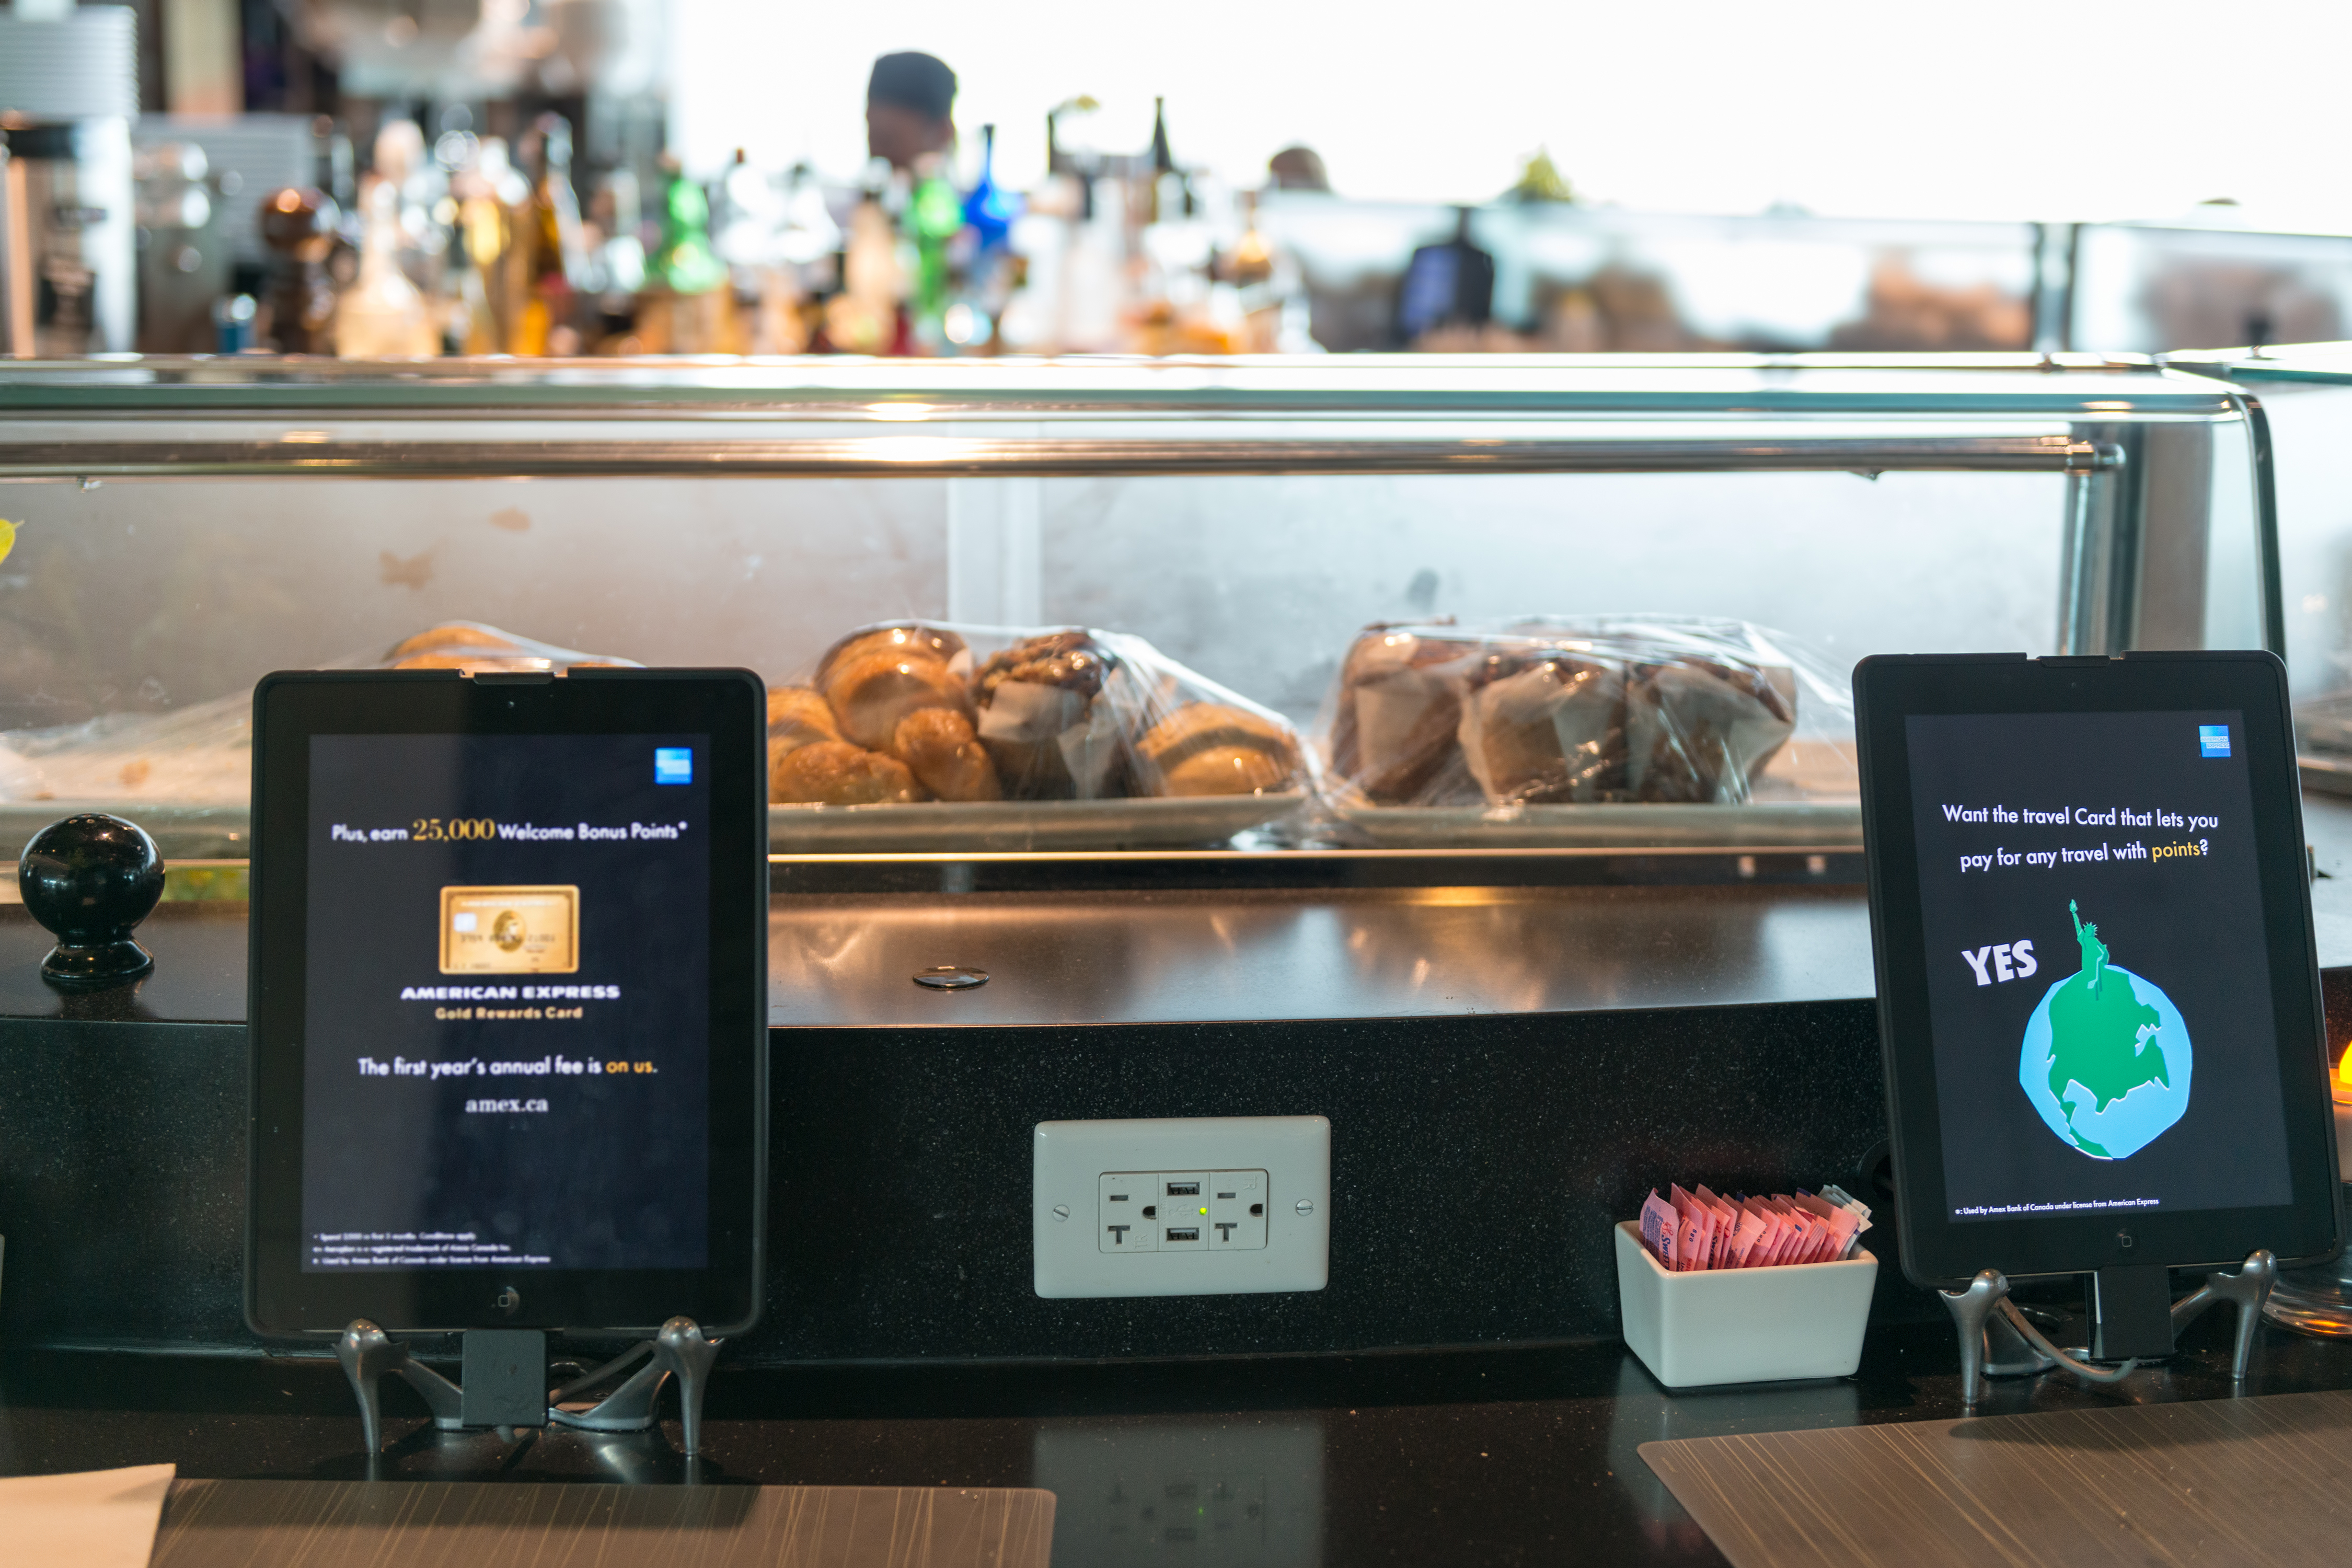 Restaurants are starting to use digital technology for self serving regarding the customer seeing their menu, ordering and paying their bill. (Roberto Machado Noa&mdash;LightRocket via Getty Images)